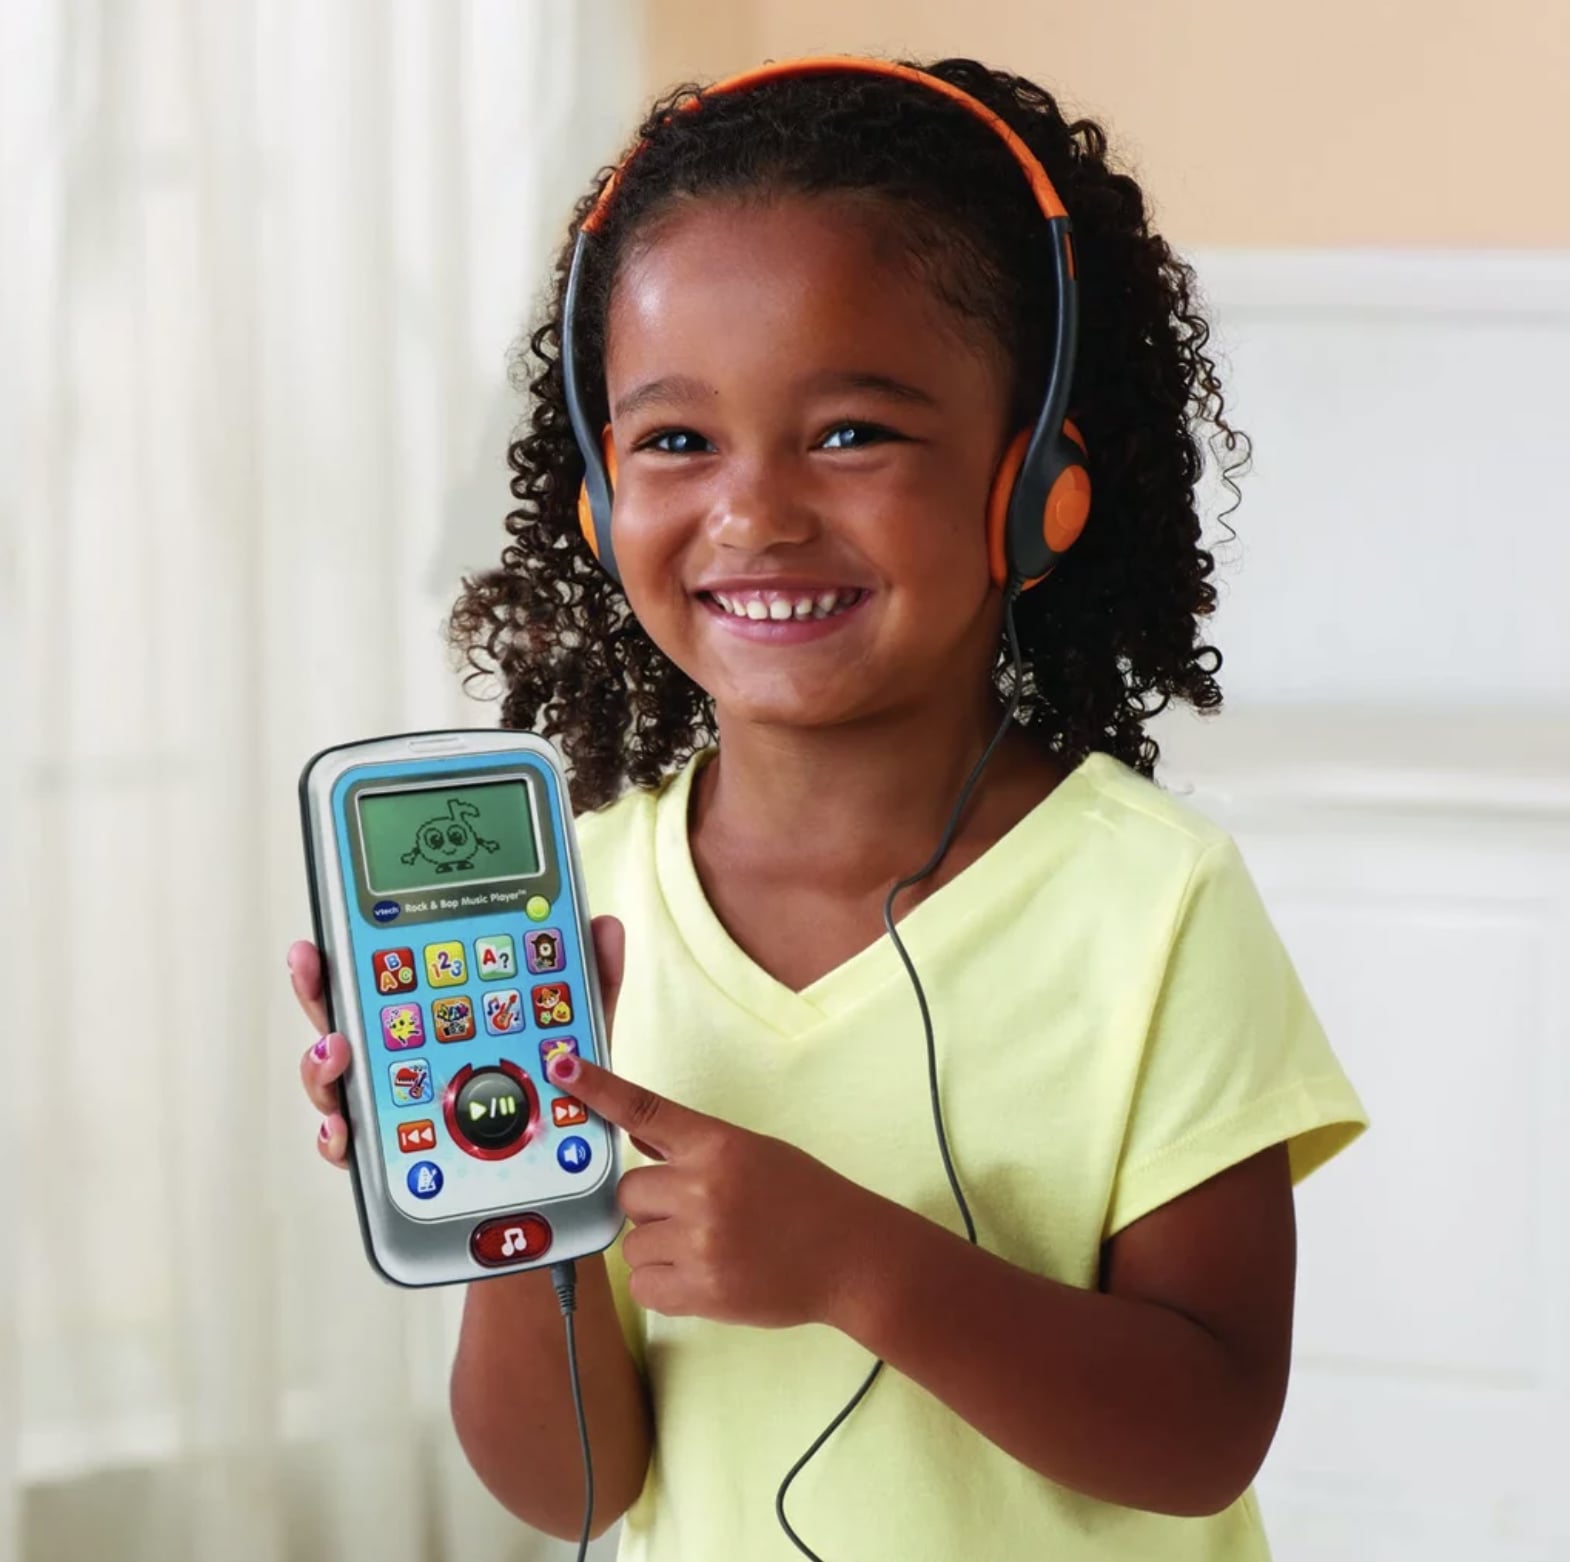 Bring Music Class Home with the VTech Kidi Star Karaoke Machine - Parenting  Healthy